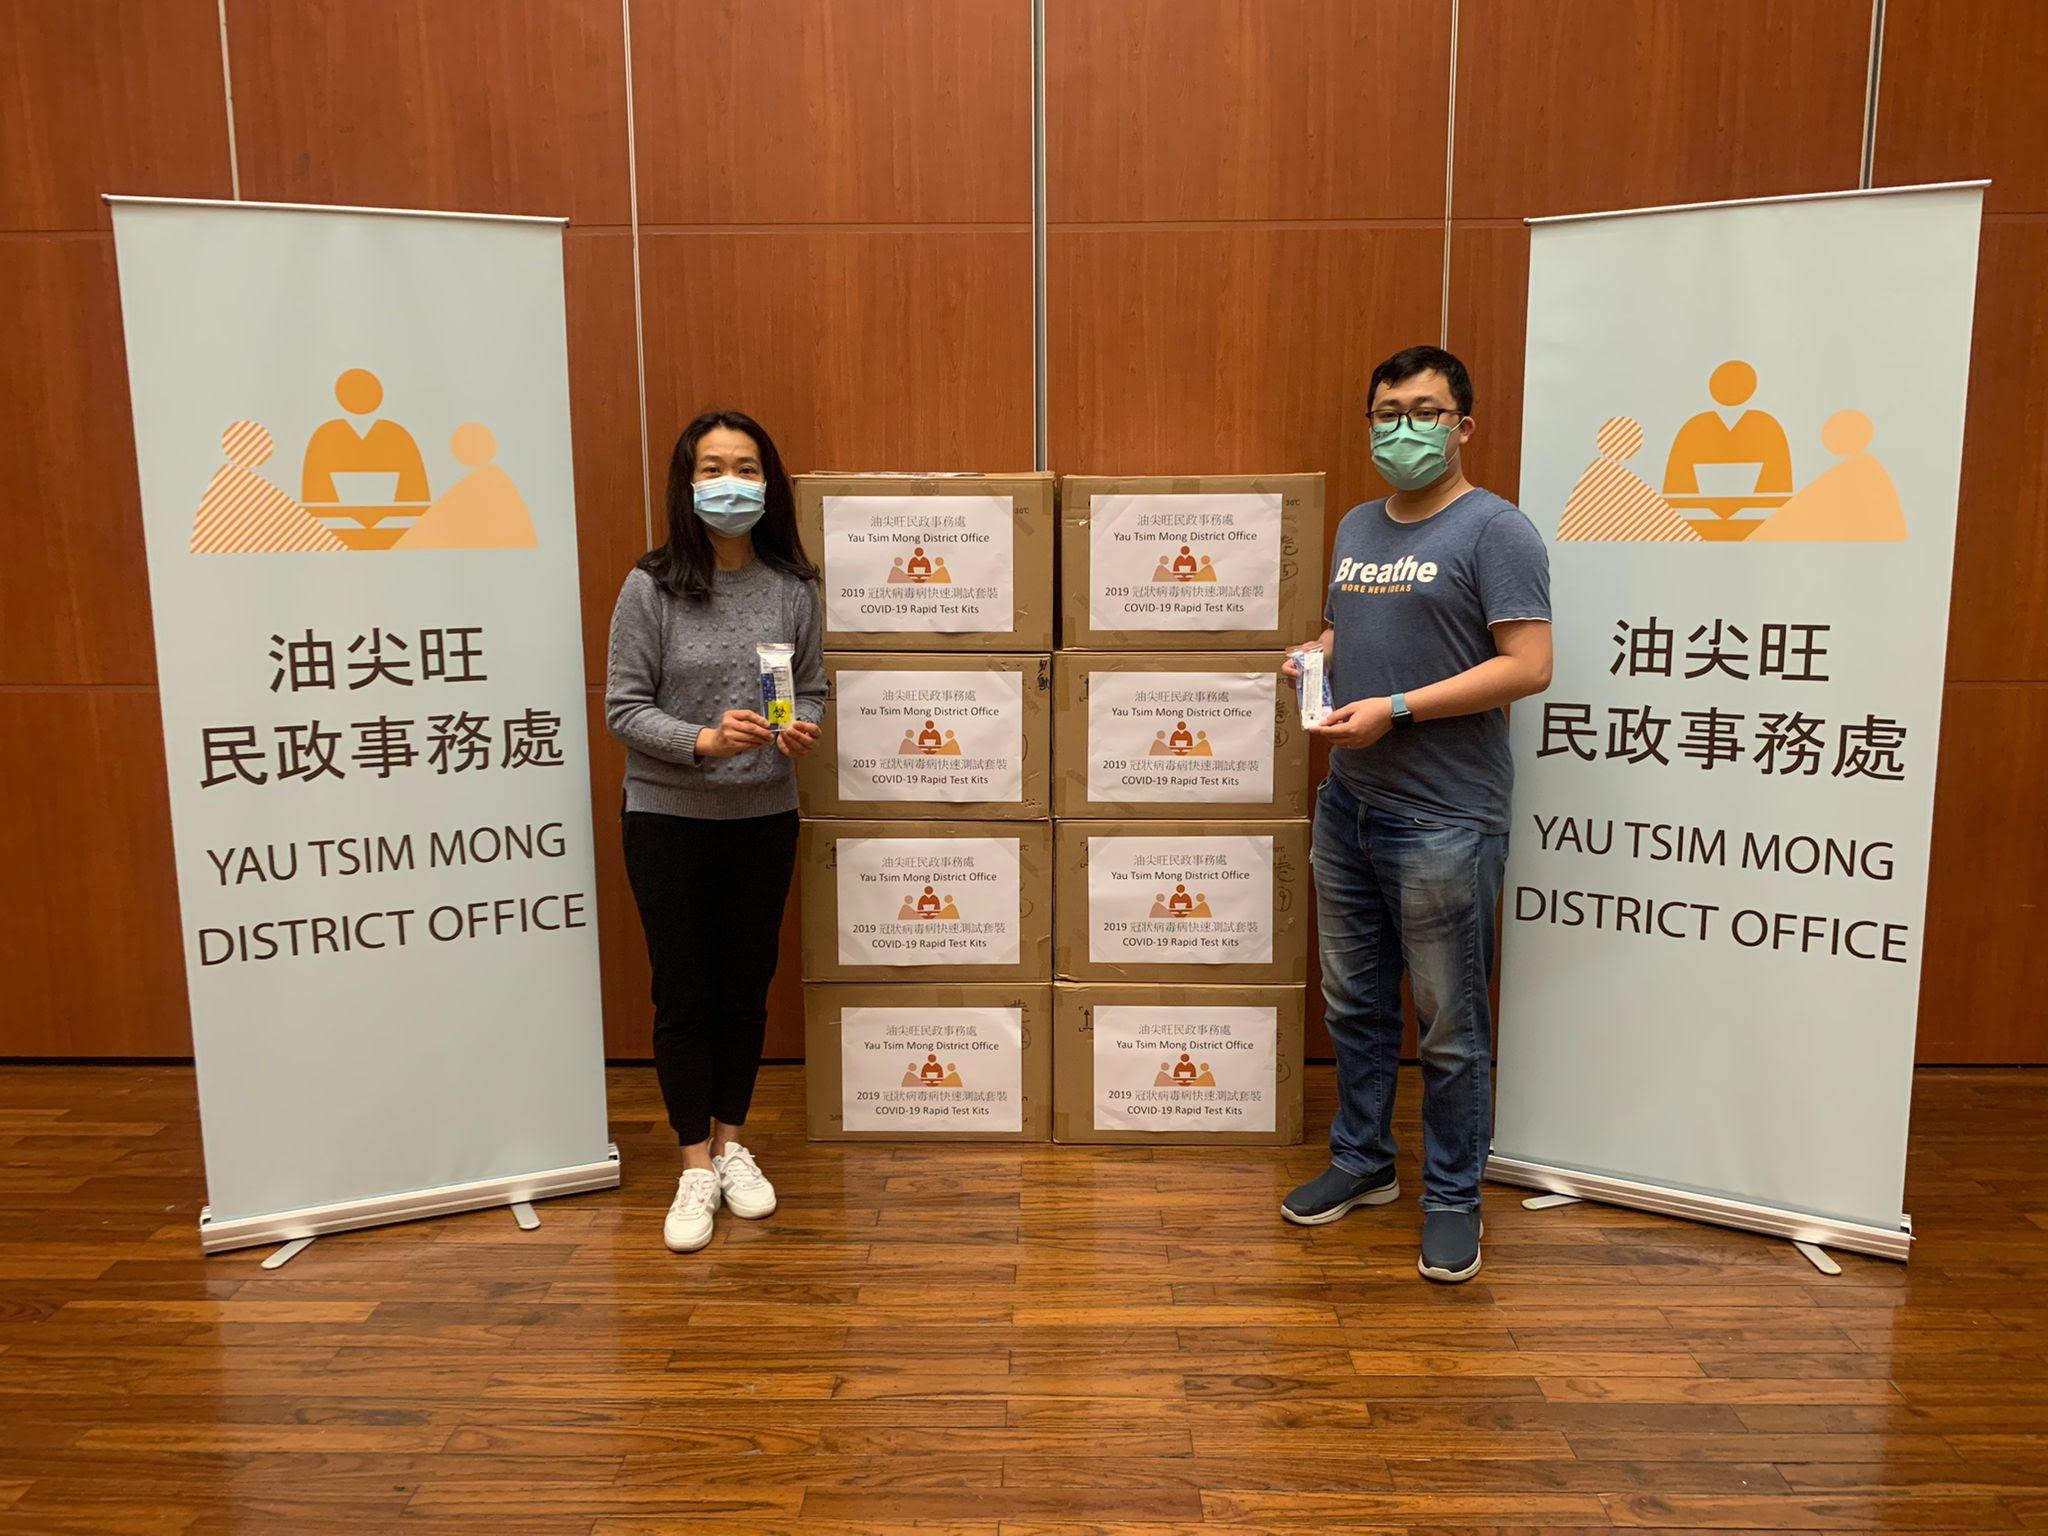 The Yau Tsim Mong District Office today (March 6) distributed COVID-19 rapid test kits to households, cleansing workers and property management staff living and working in Metro Harbour View for voluntary testing through the property management company.